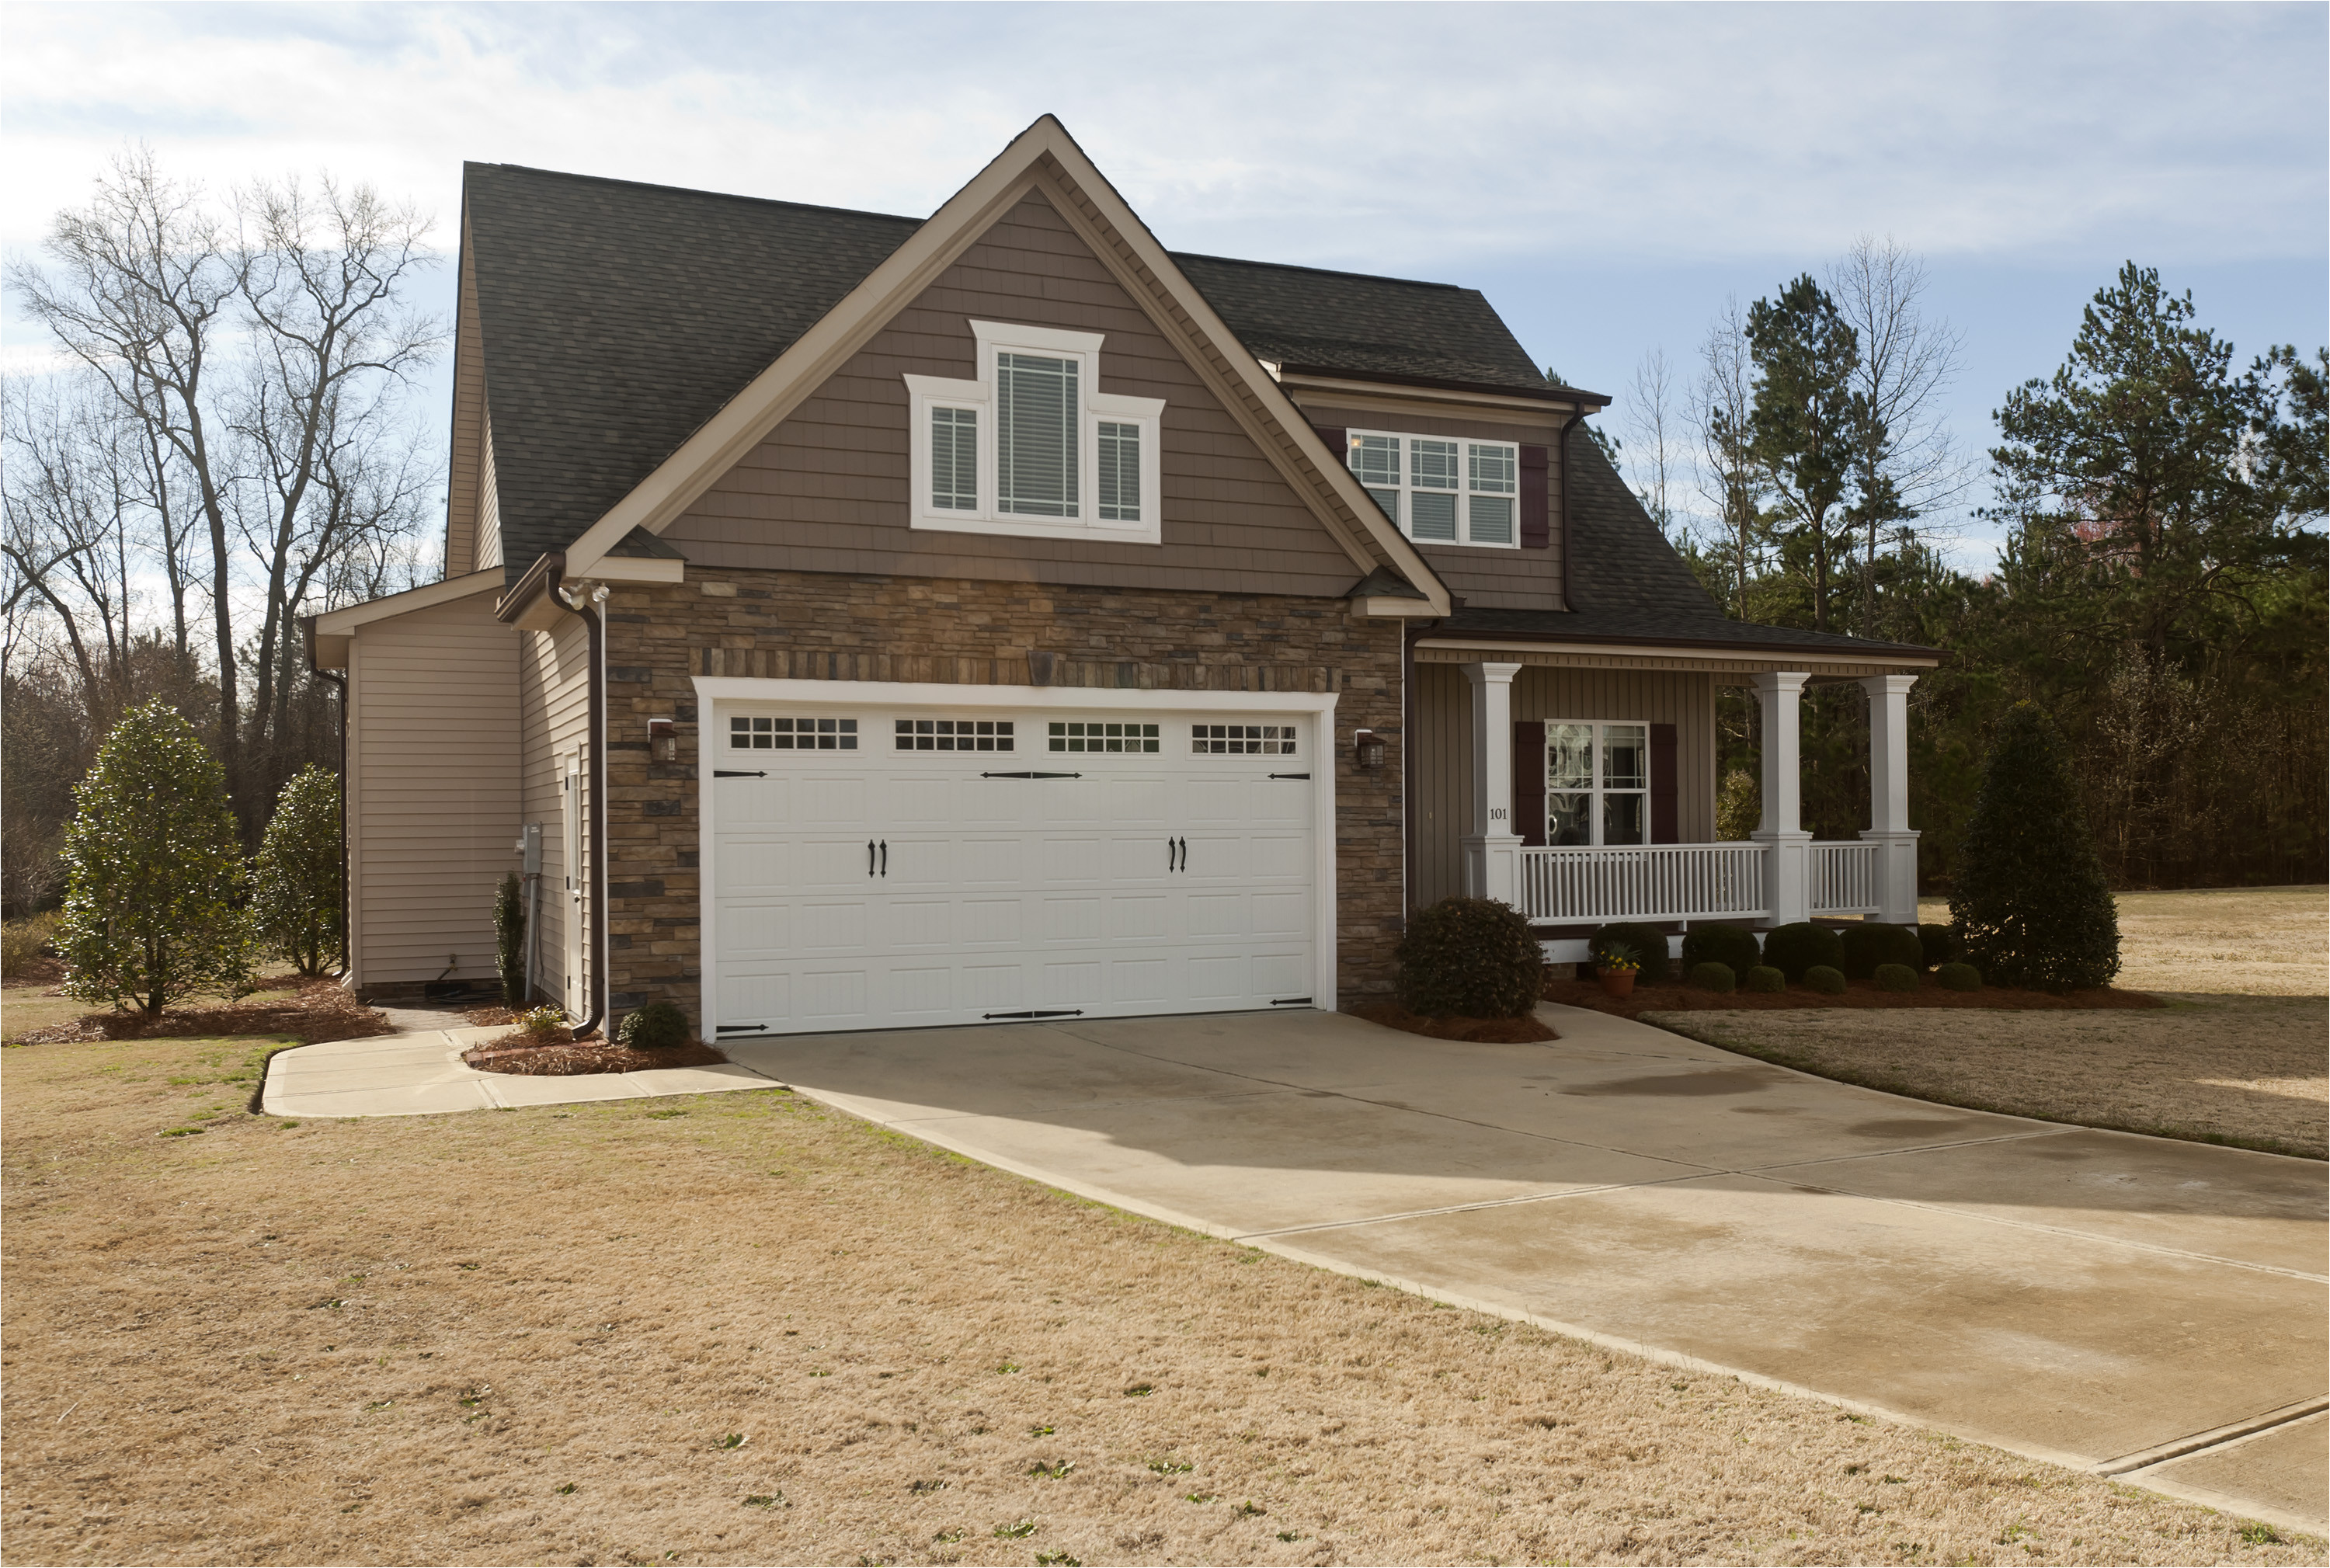 this home is a true gem and still conveniently located to everything in the triangle call ginger today to arrange a private showing before it hits the